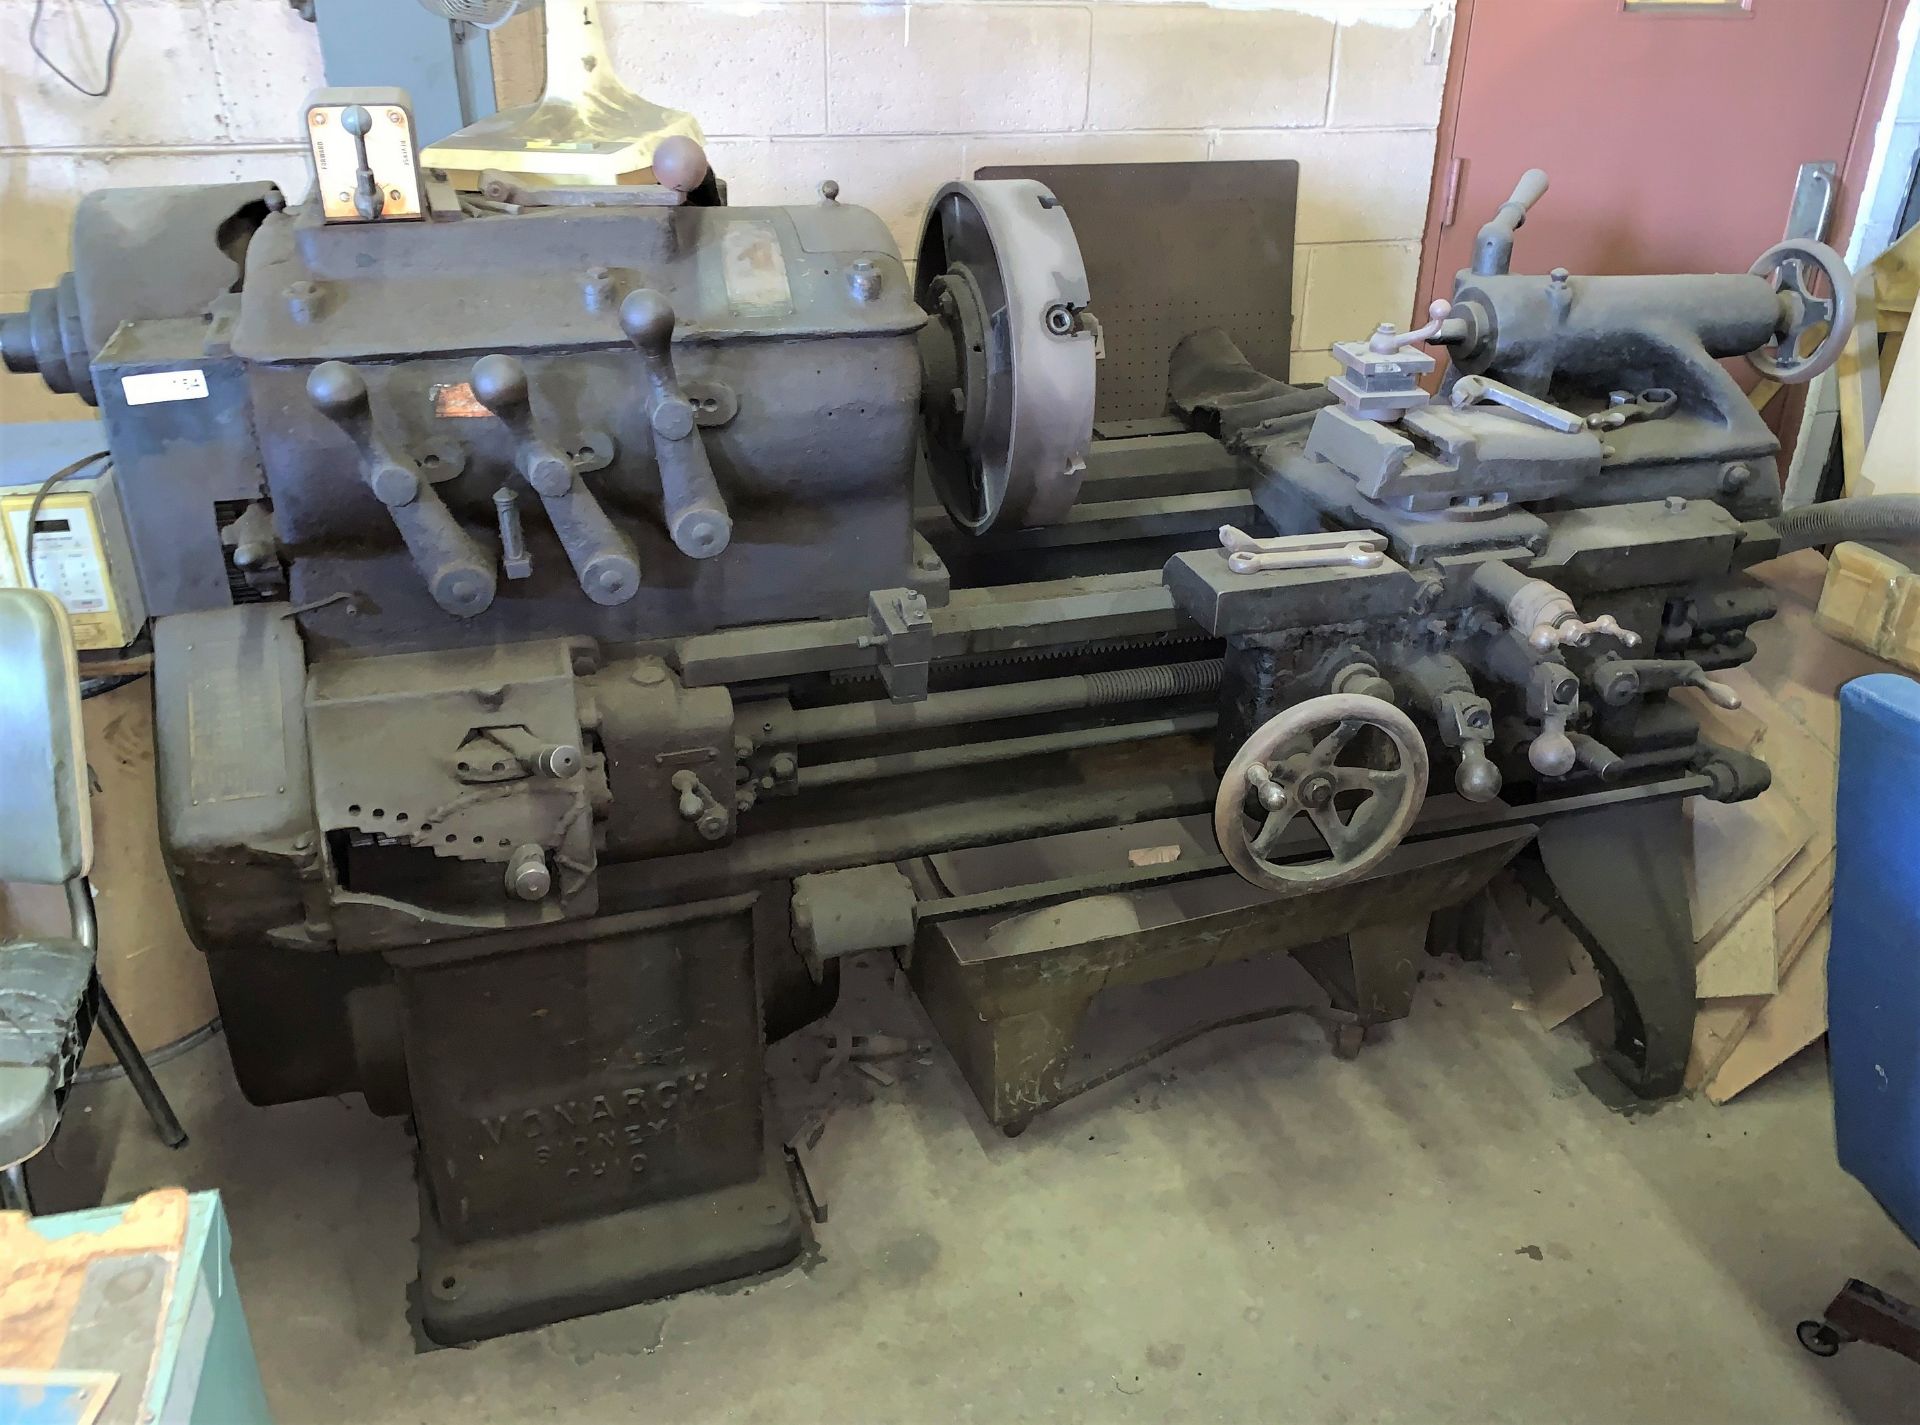 Monarch Lathe, 21"Diameter Swing, 24" Between Centers, Carriage, Tail Stock, 16"Diameter 4-Jaw Chuck